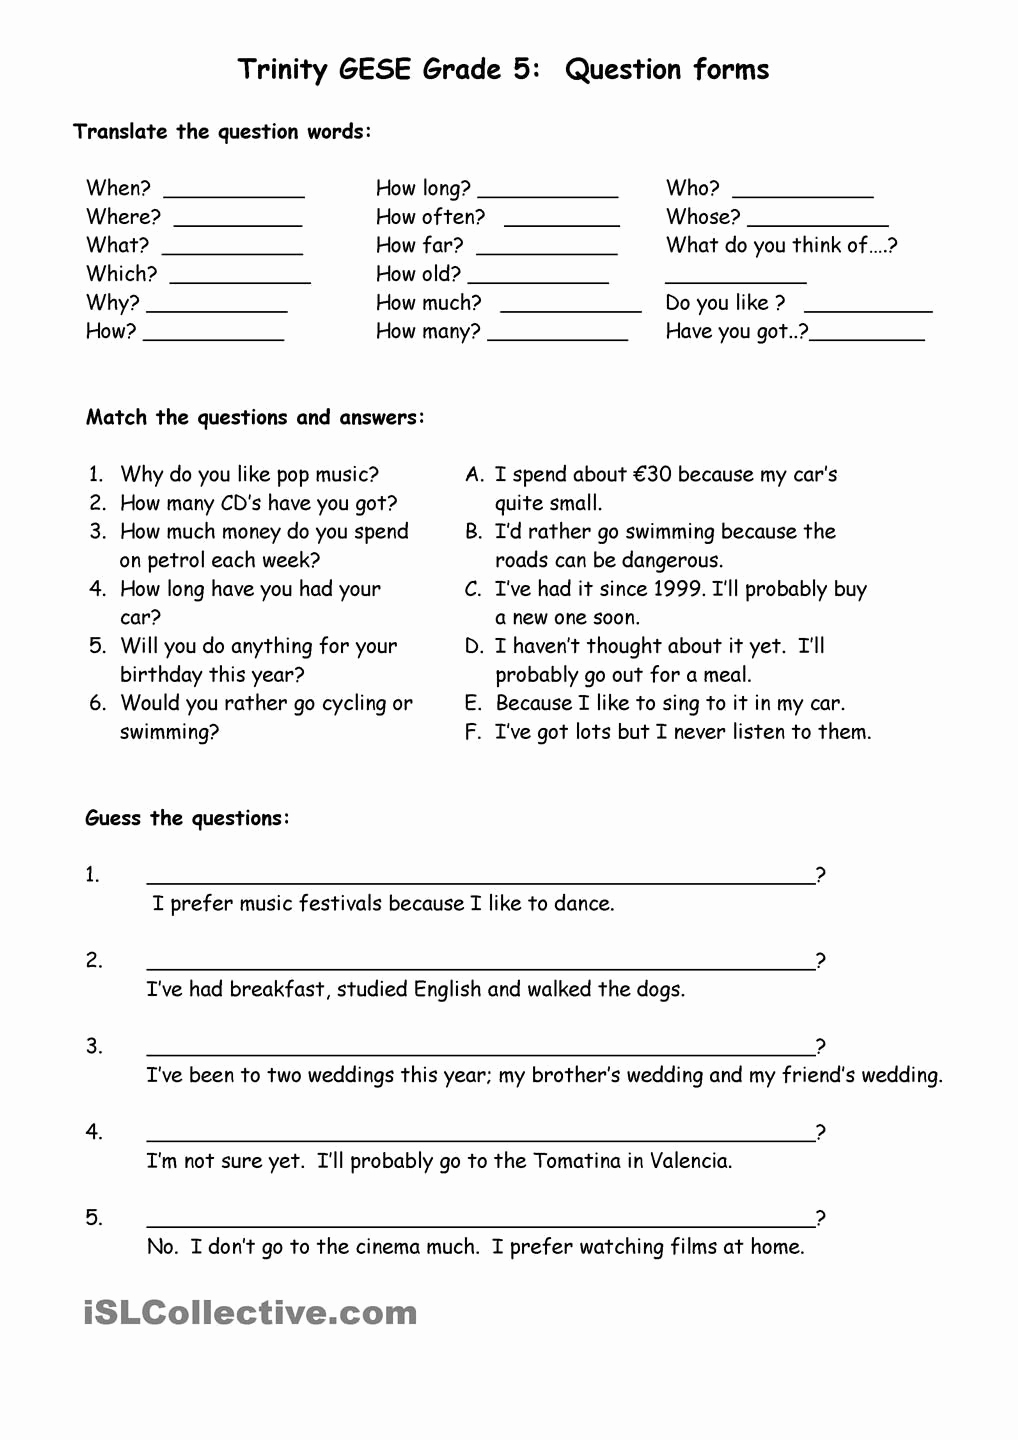 Homonyms Worksheets 5th Grade Awesome 20 Homonyms Worksheets 5th Grade